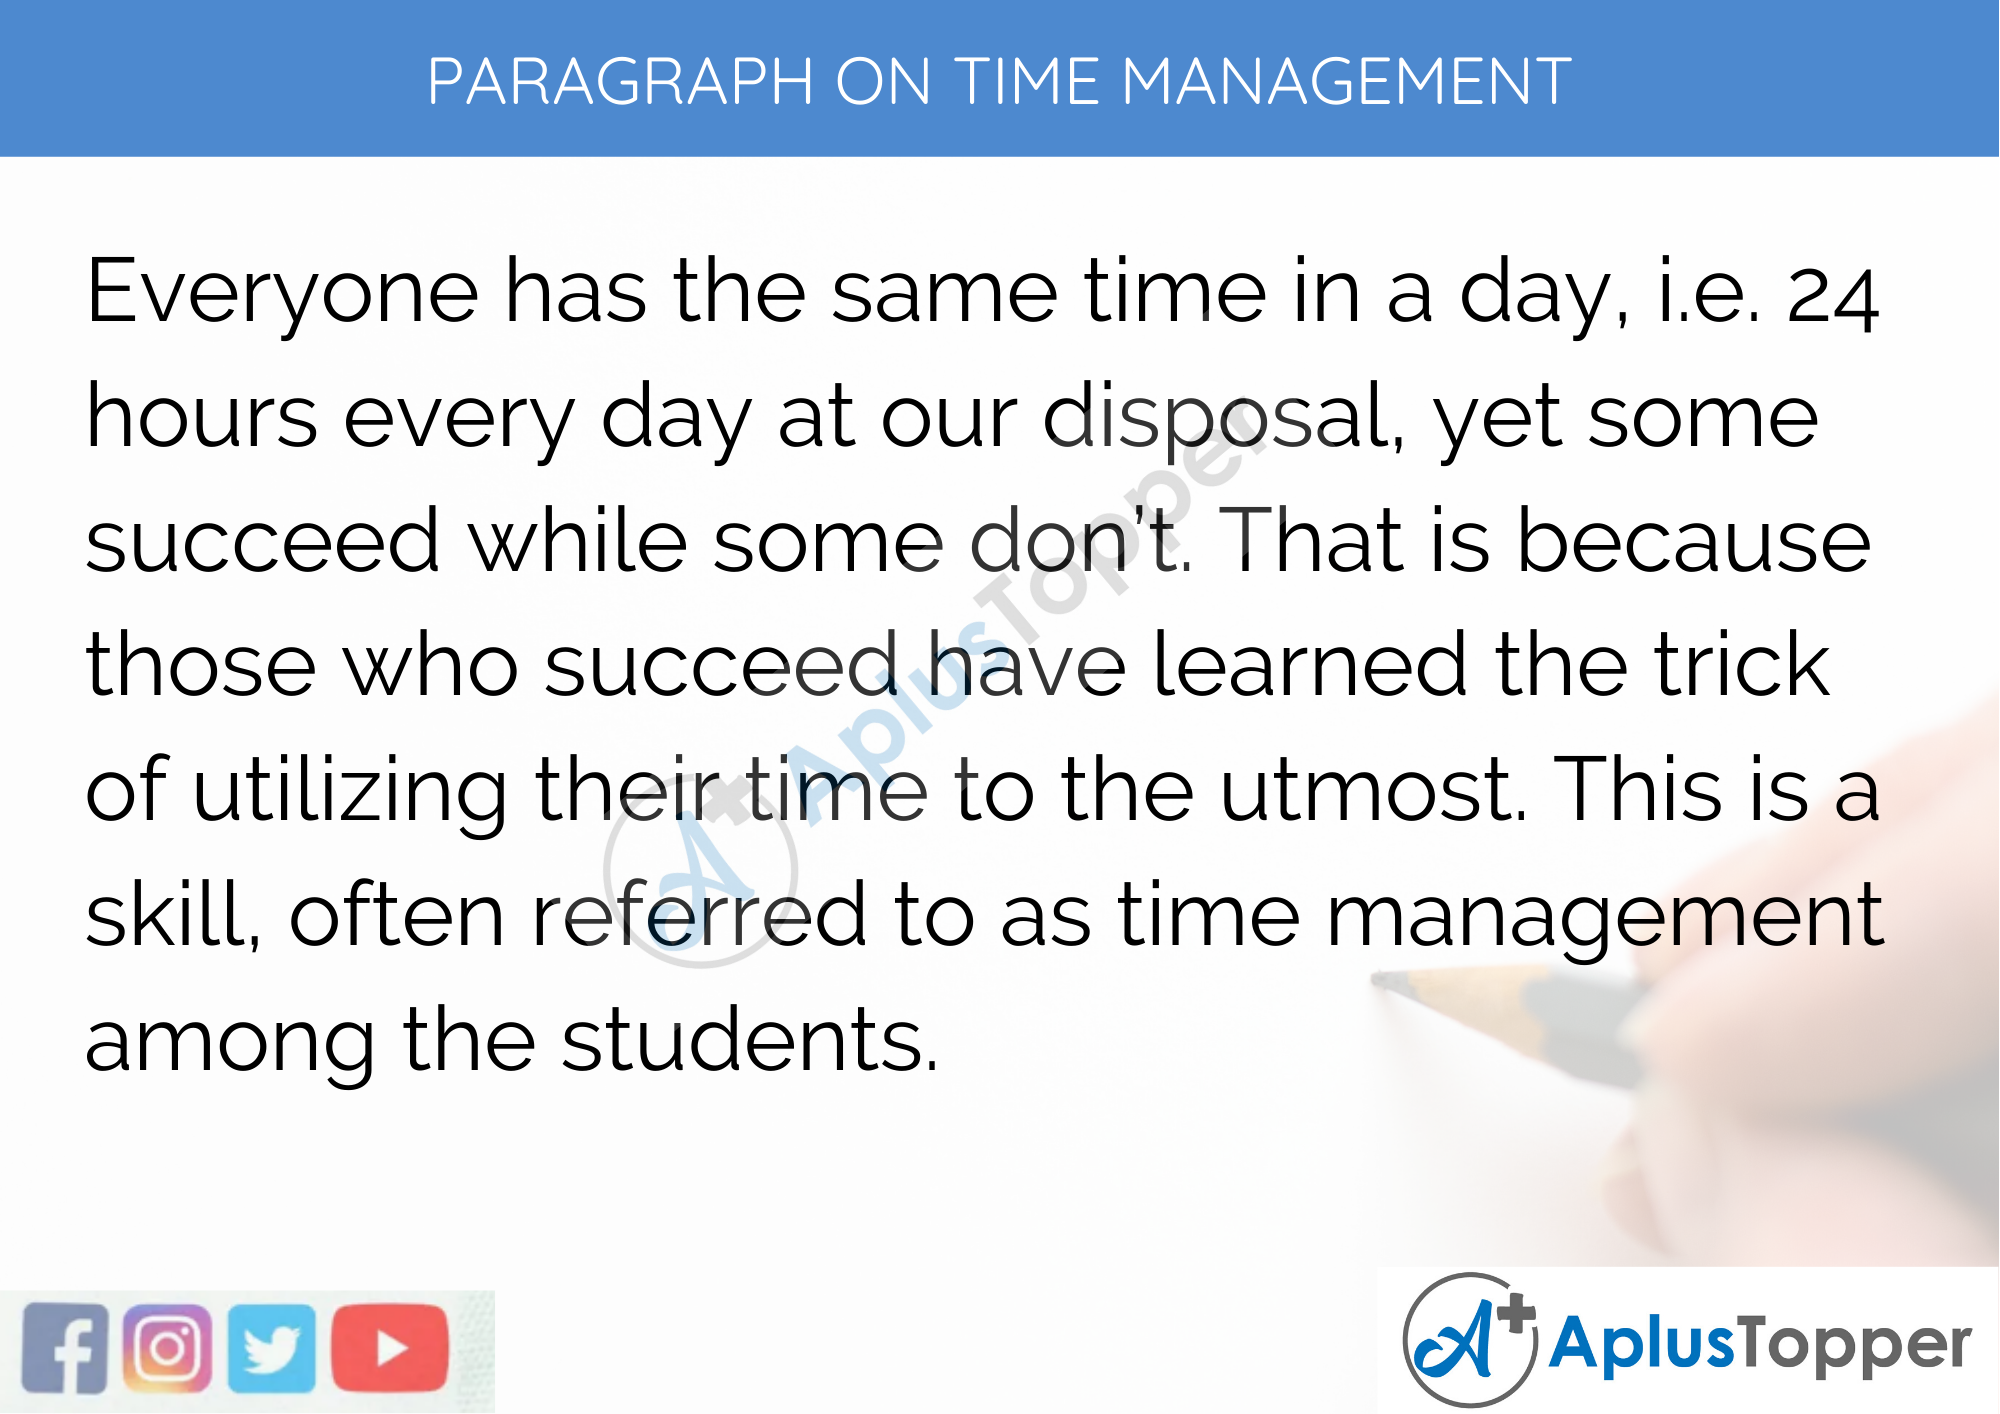 essay on time management 250 words